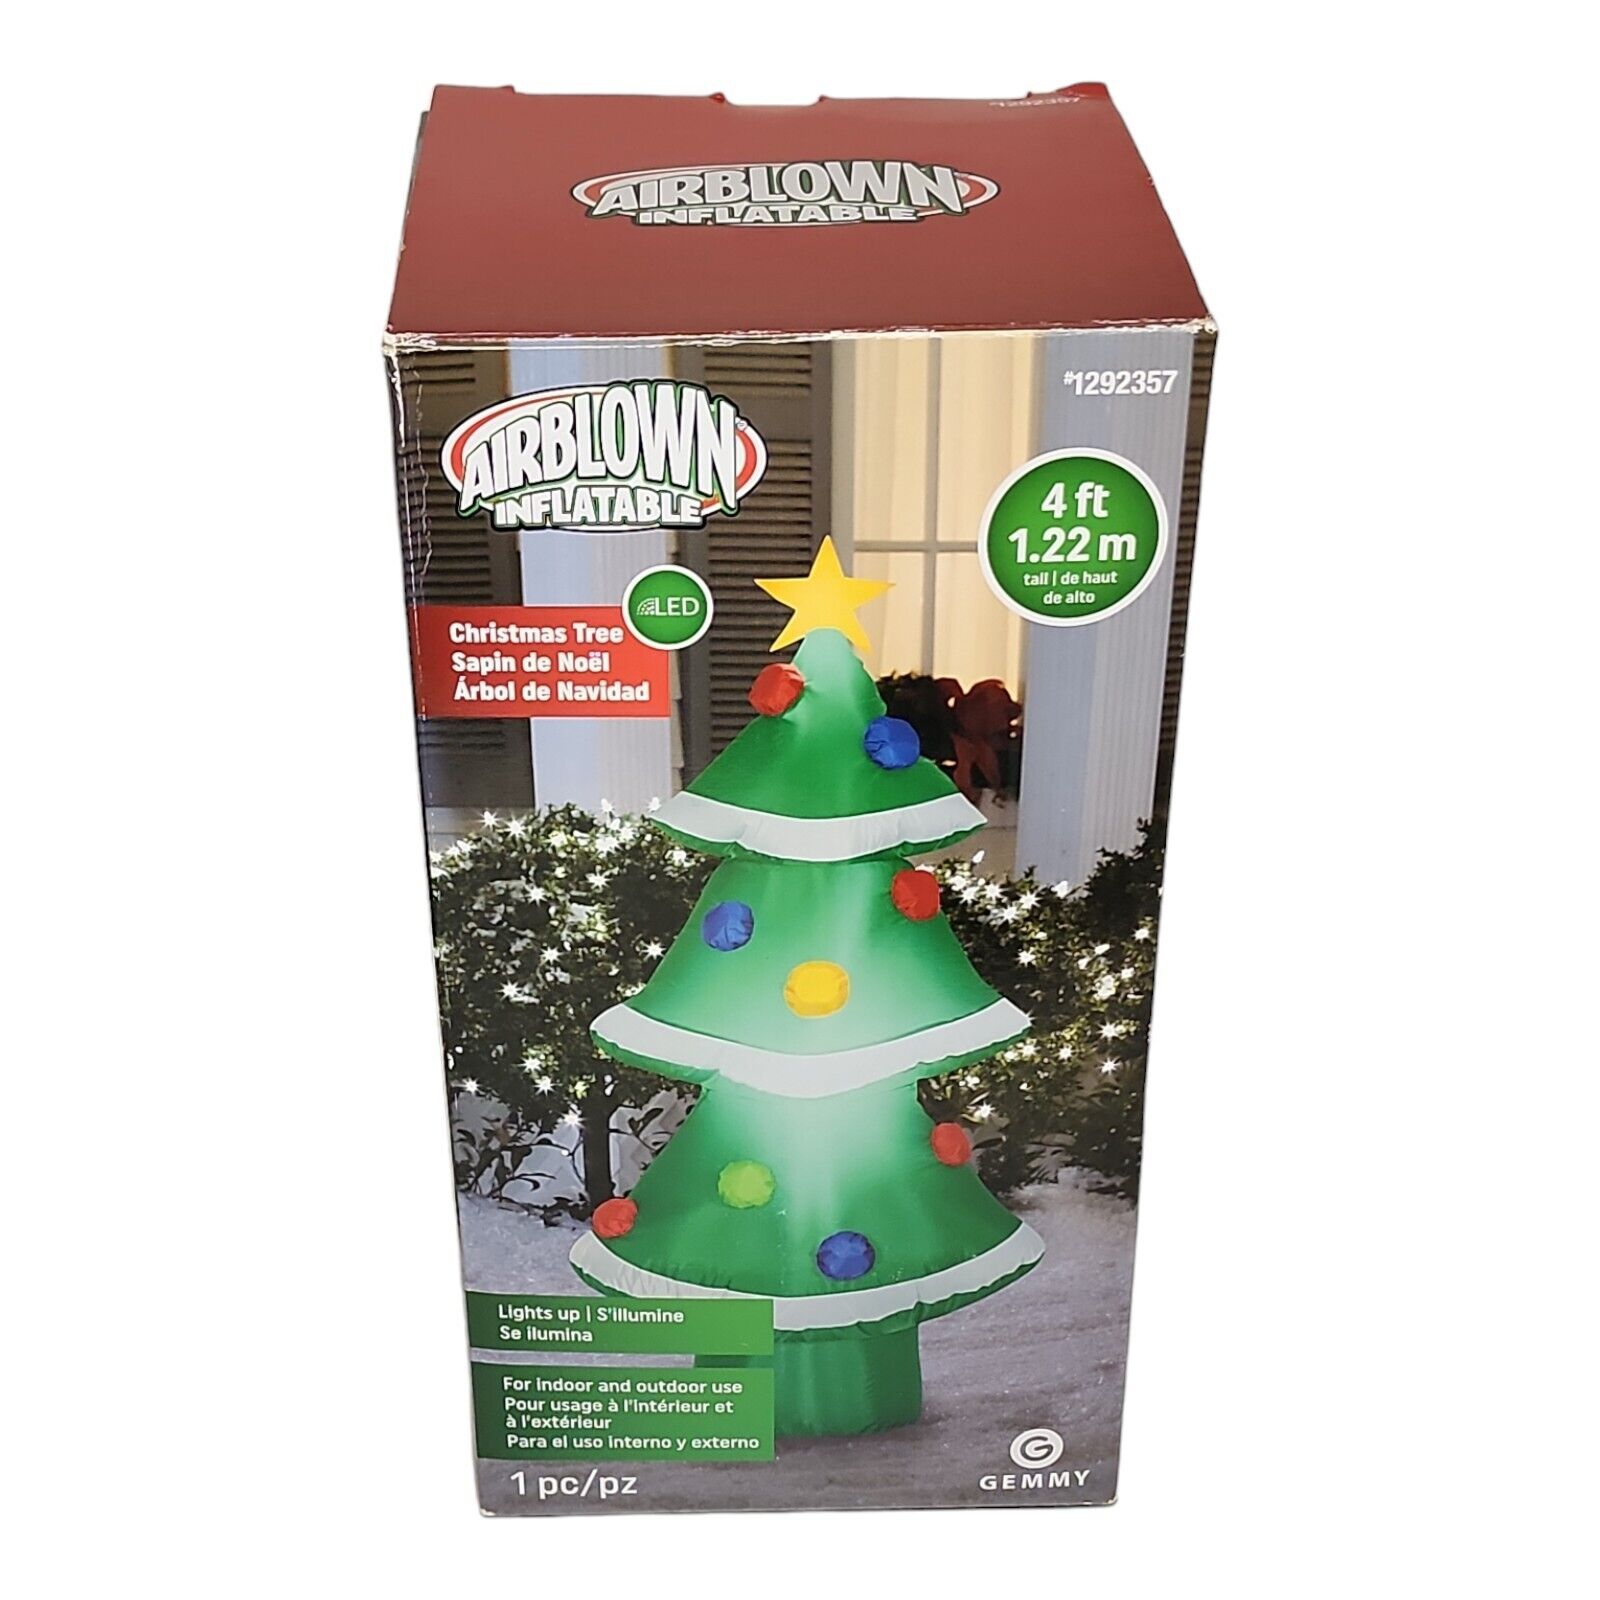 Gemmy Airblown 4Ft Christmas Tree Inflatable LED Light Indoor Outdoor 2019 Works